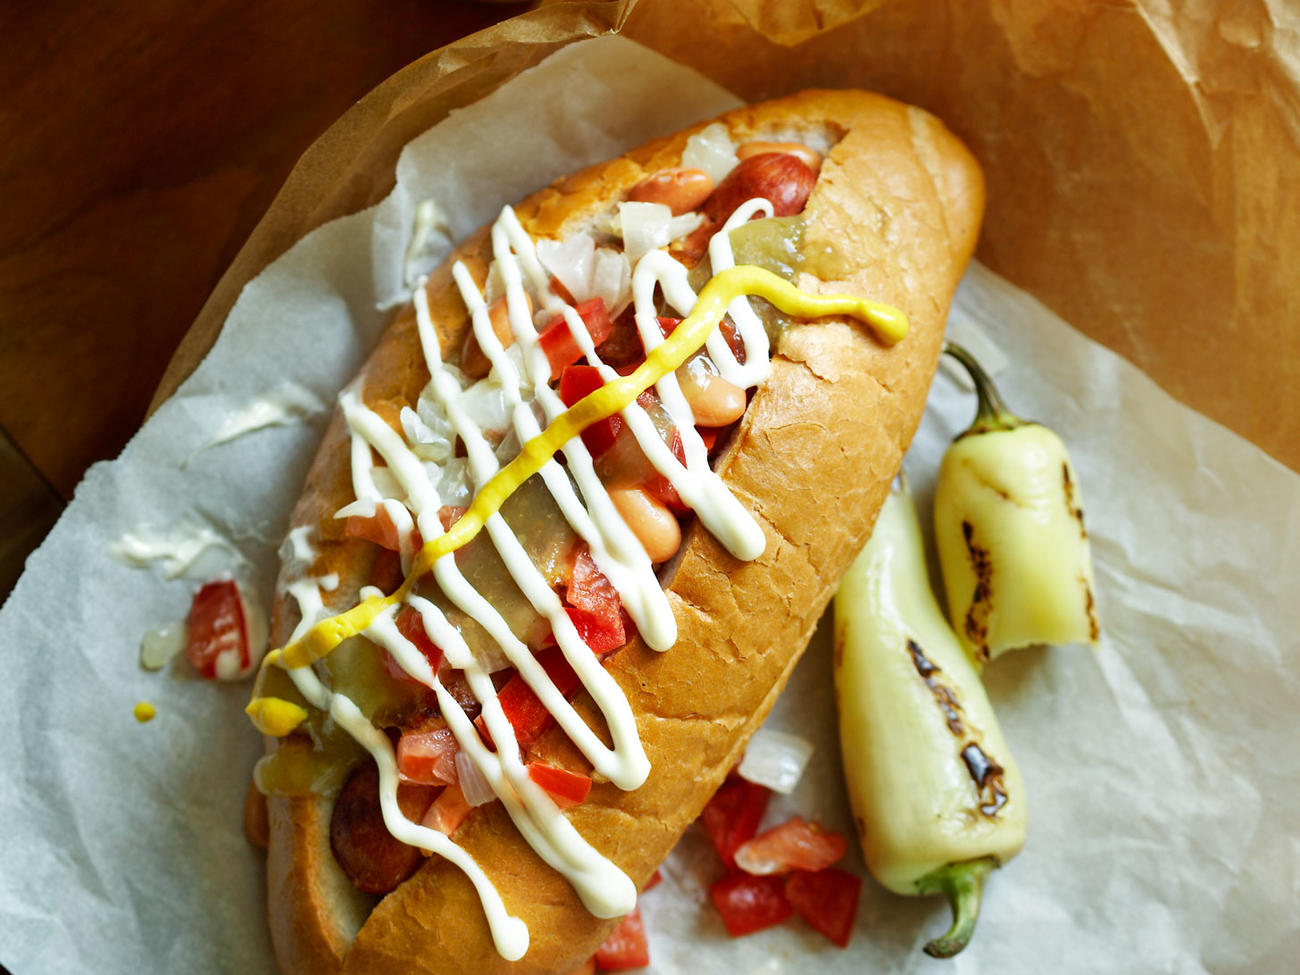 The Top Hot Dog